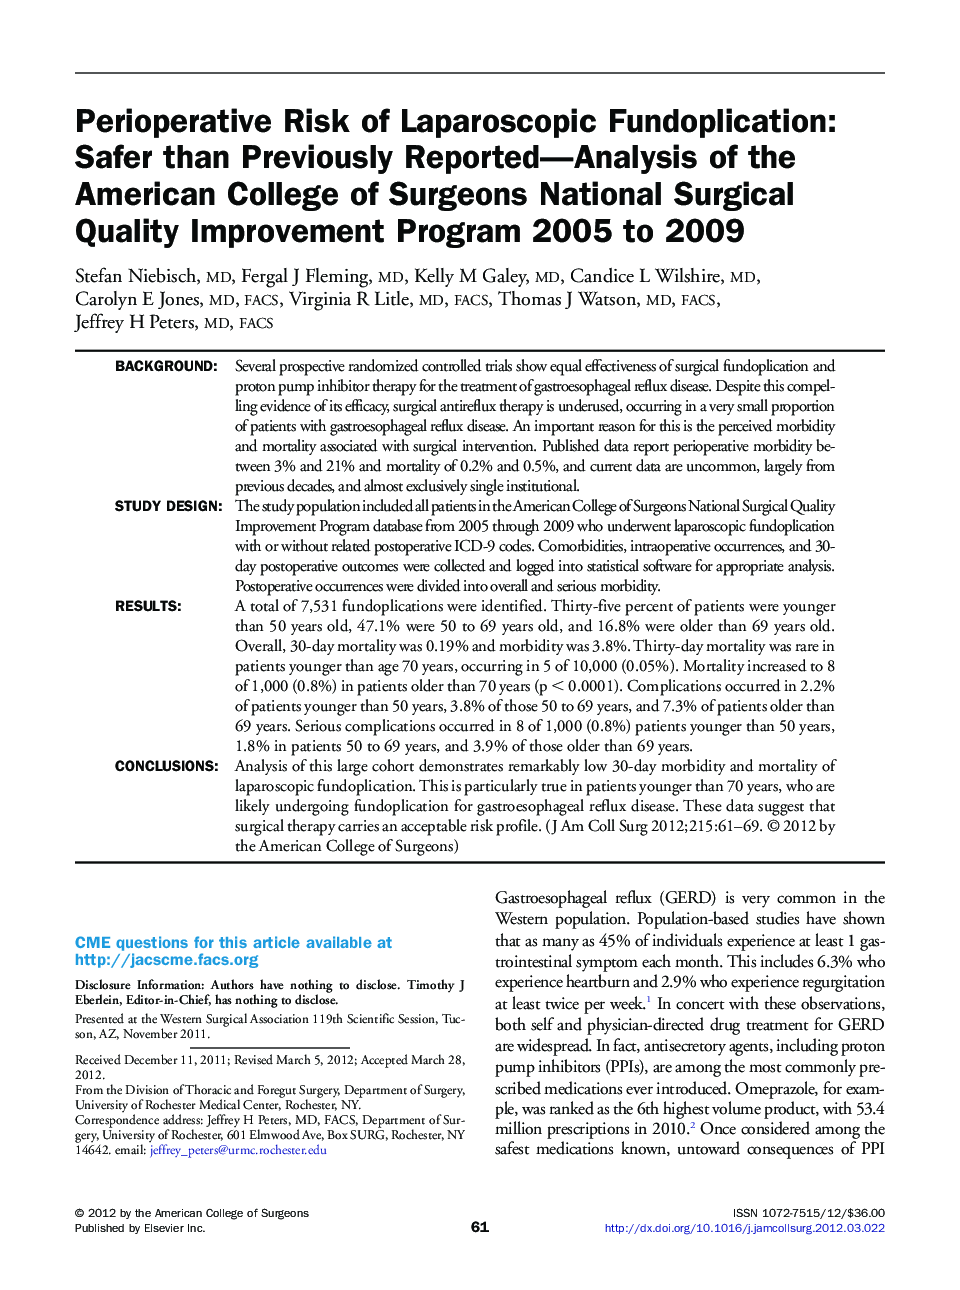 Perioperative Risk of Laparoscopic Fundoplication: Safer than Previously Reported—Analysis of the American College of Surgeons National Surgical Quality Improvement Program 2005 to 2009 